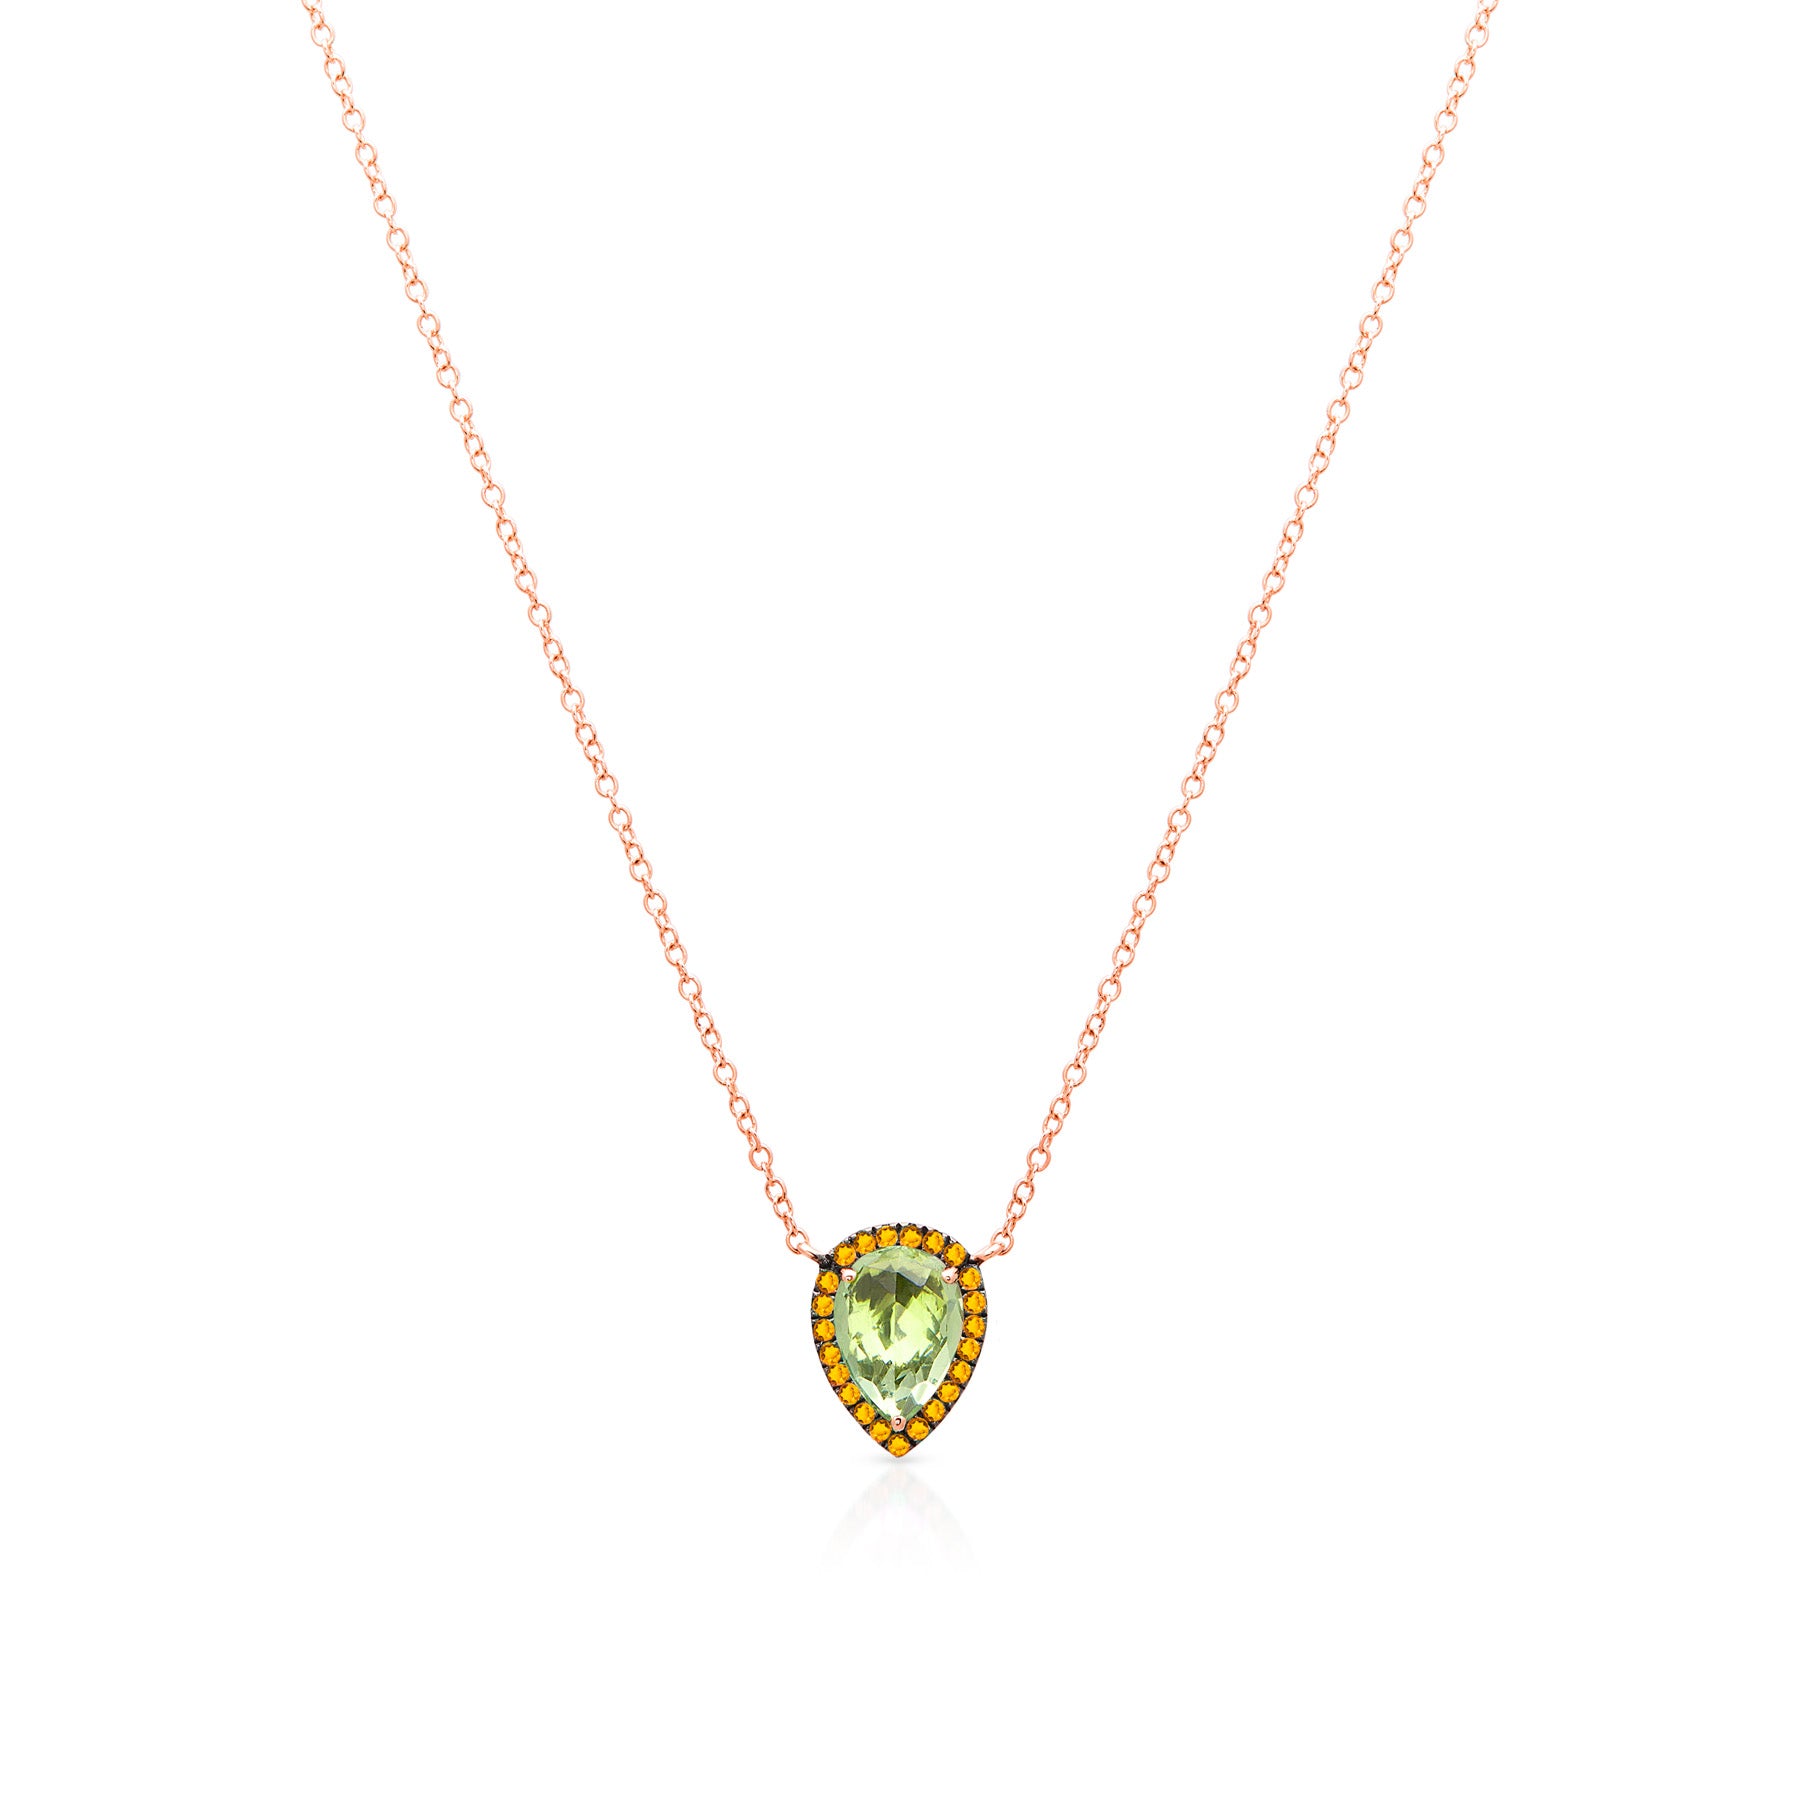 14KT Rose Gold Customize Your Own Sophie Necklace